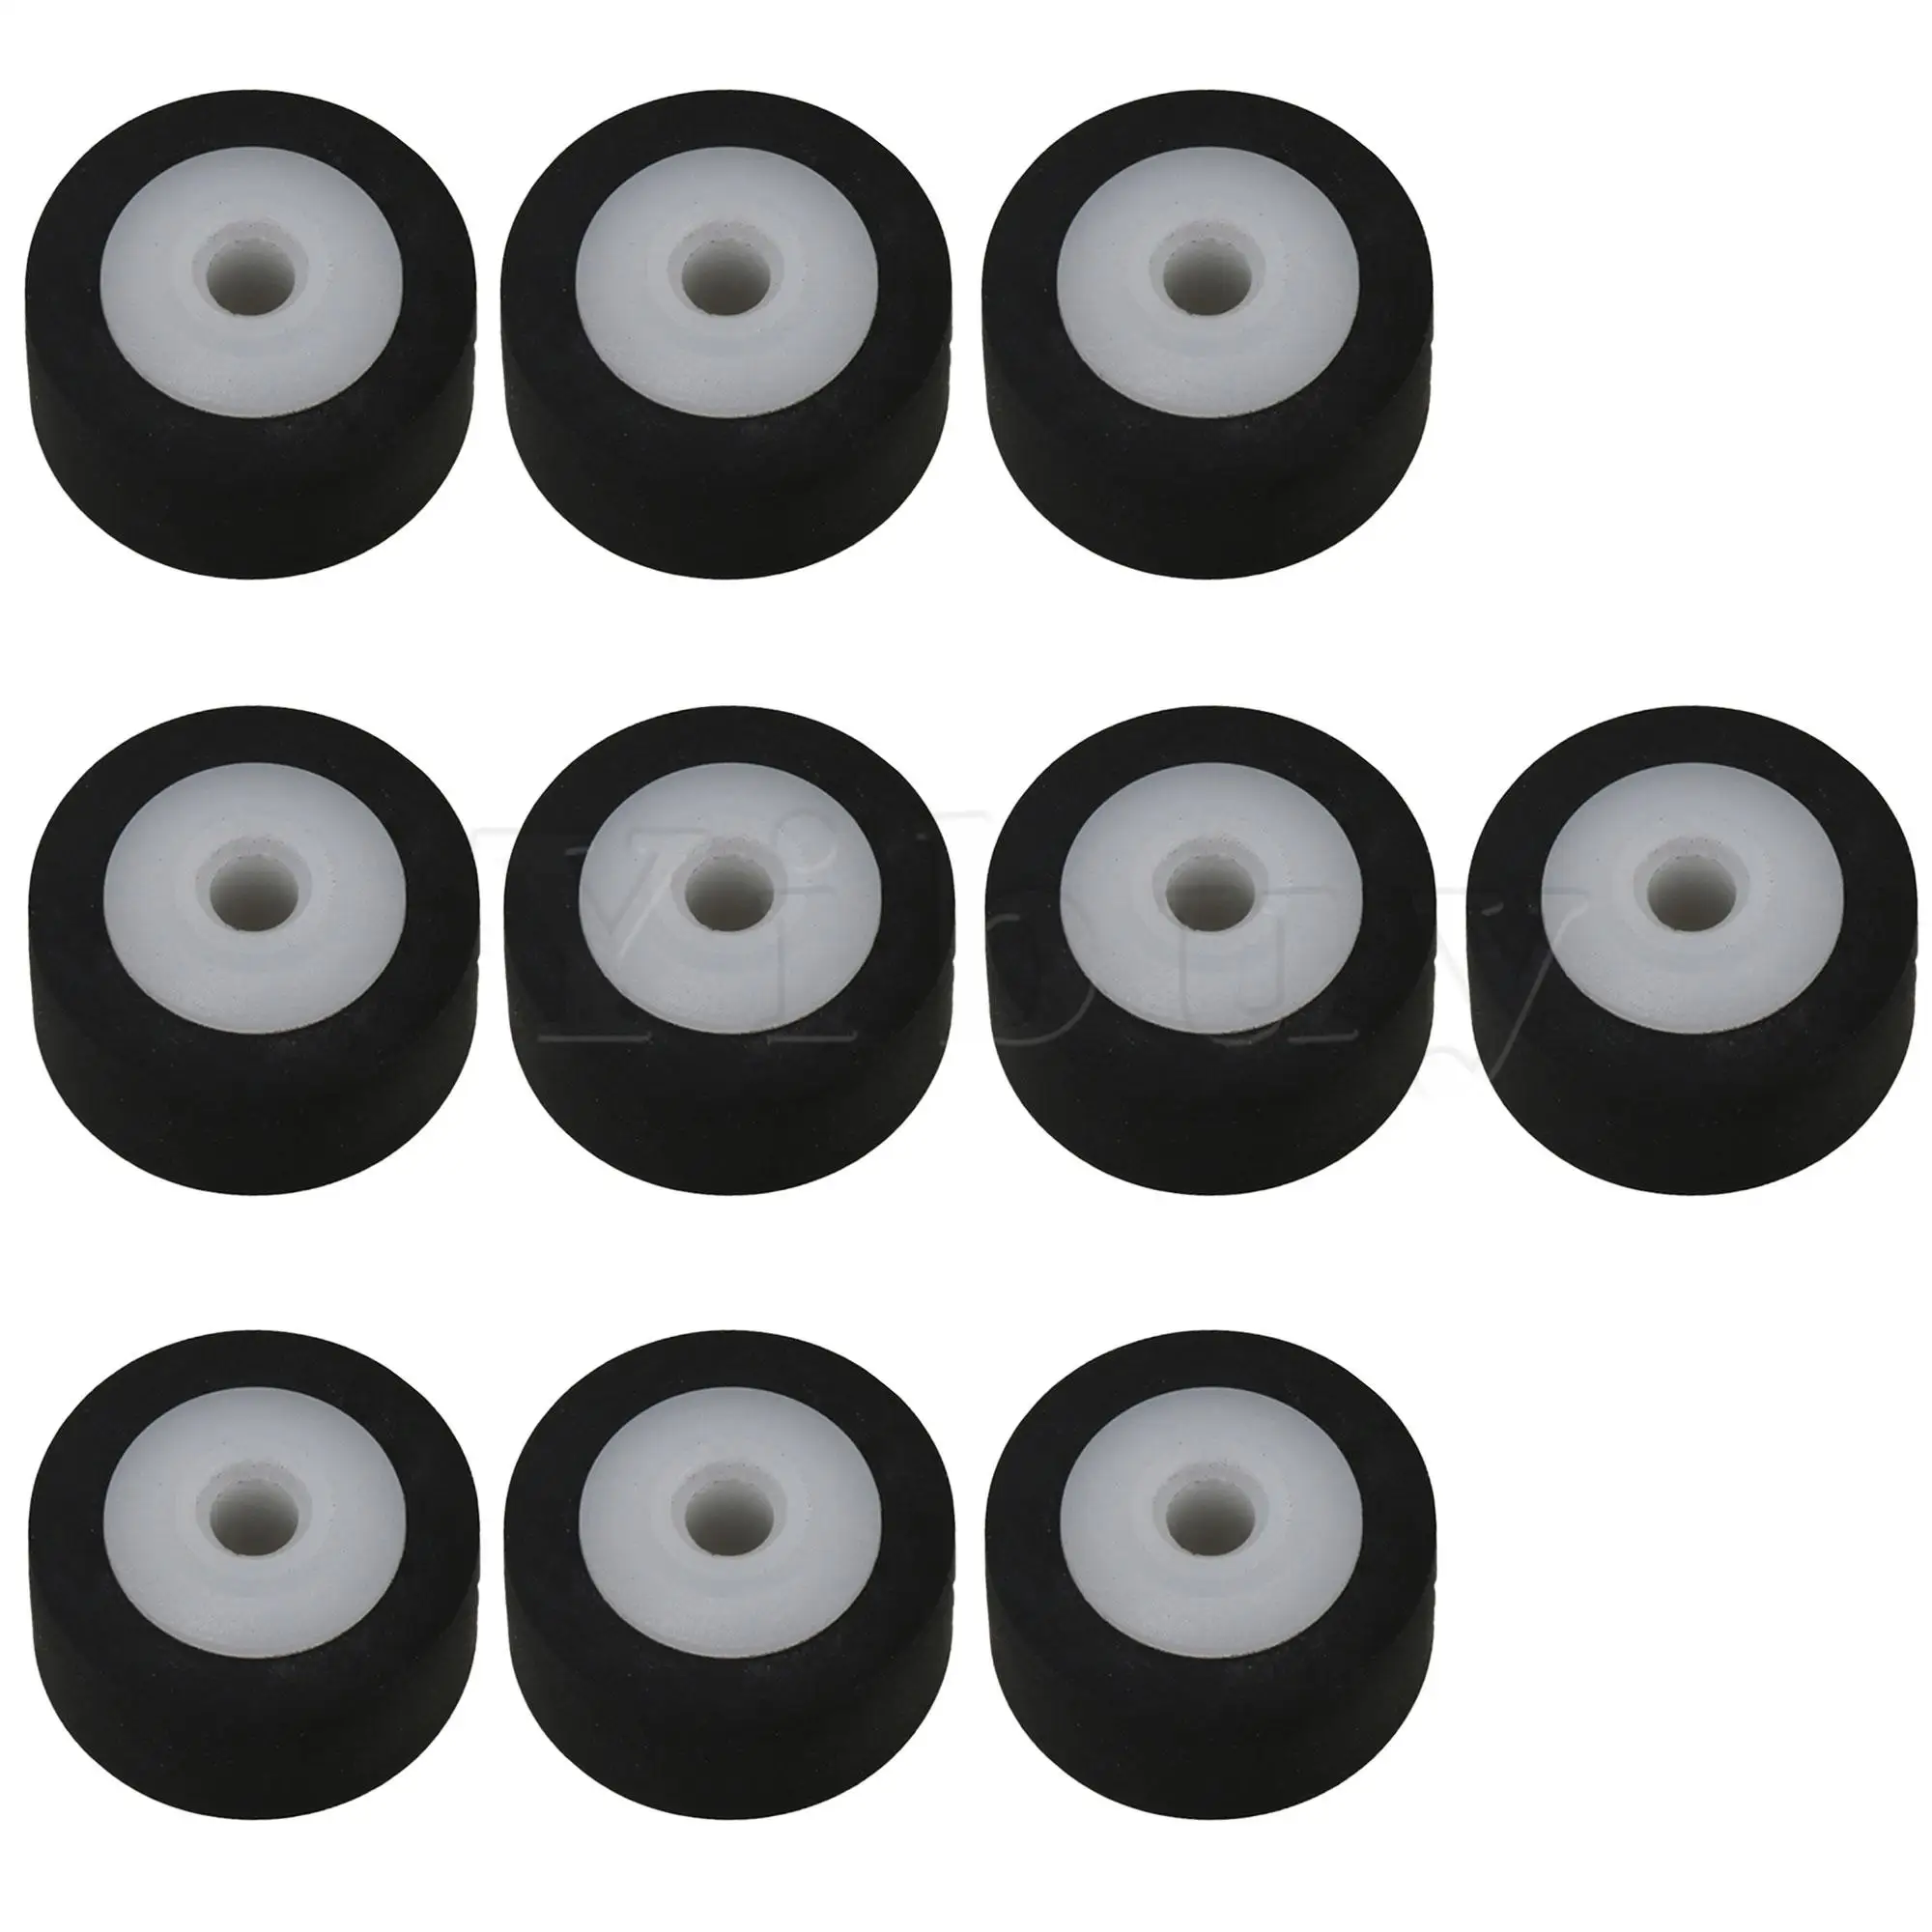 

10pcs 13x6x2.5mm Rubber Bearing Roller Guide Pulley Bearing Wheel Pinch Roller for Tape Recorder